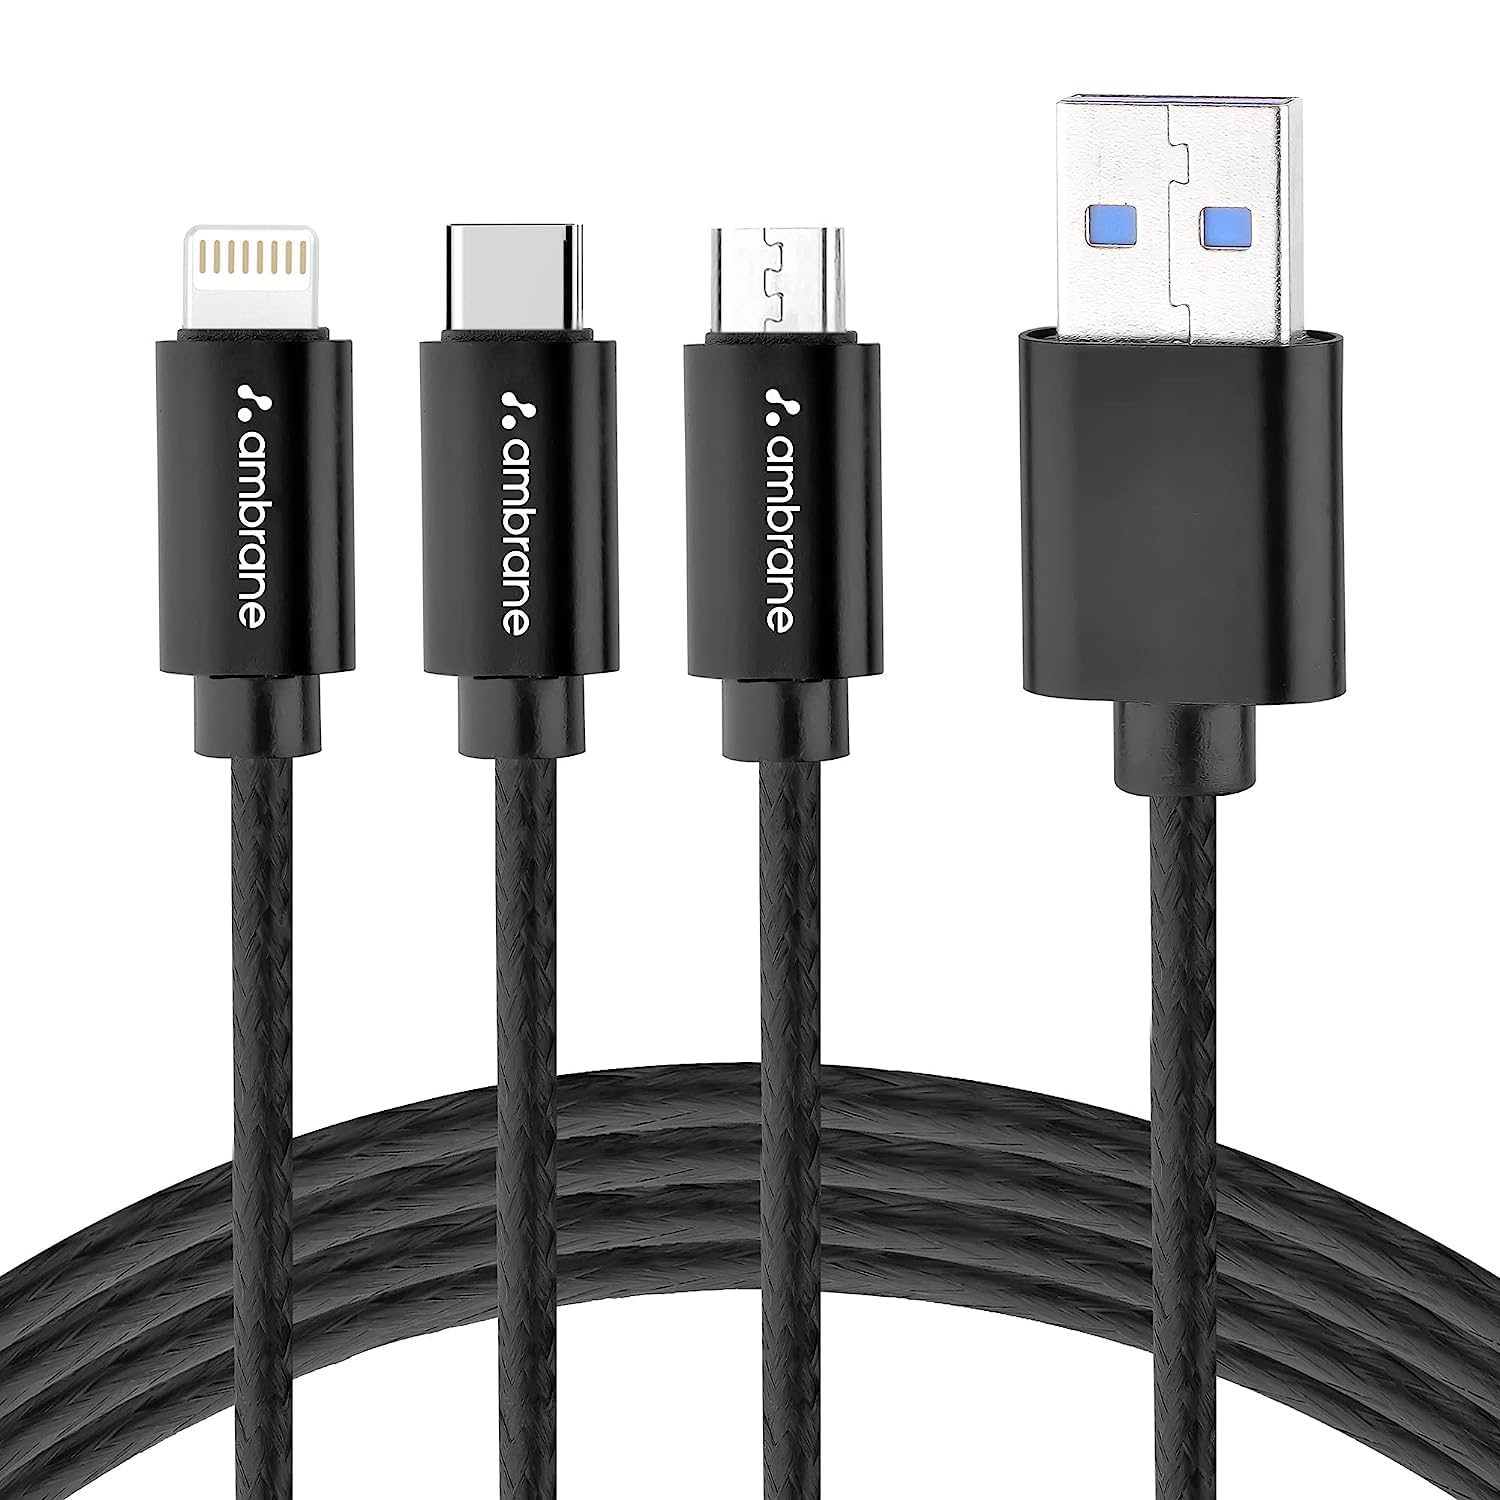 Ambrane Unbreakable 3 in 1 USB Fast Charging Multipurpose Cable with Type C, Lig